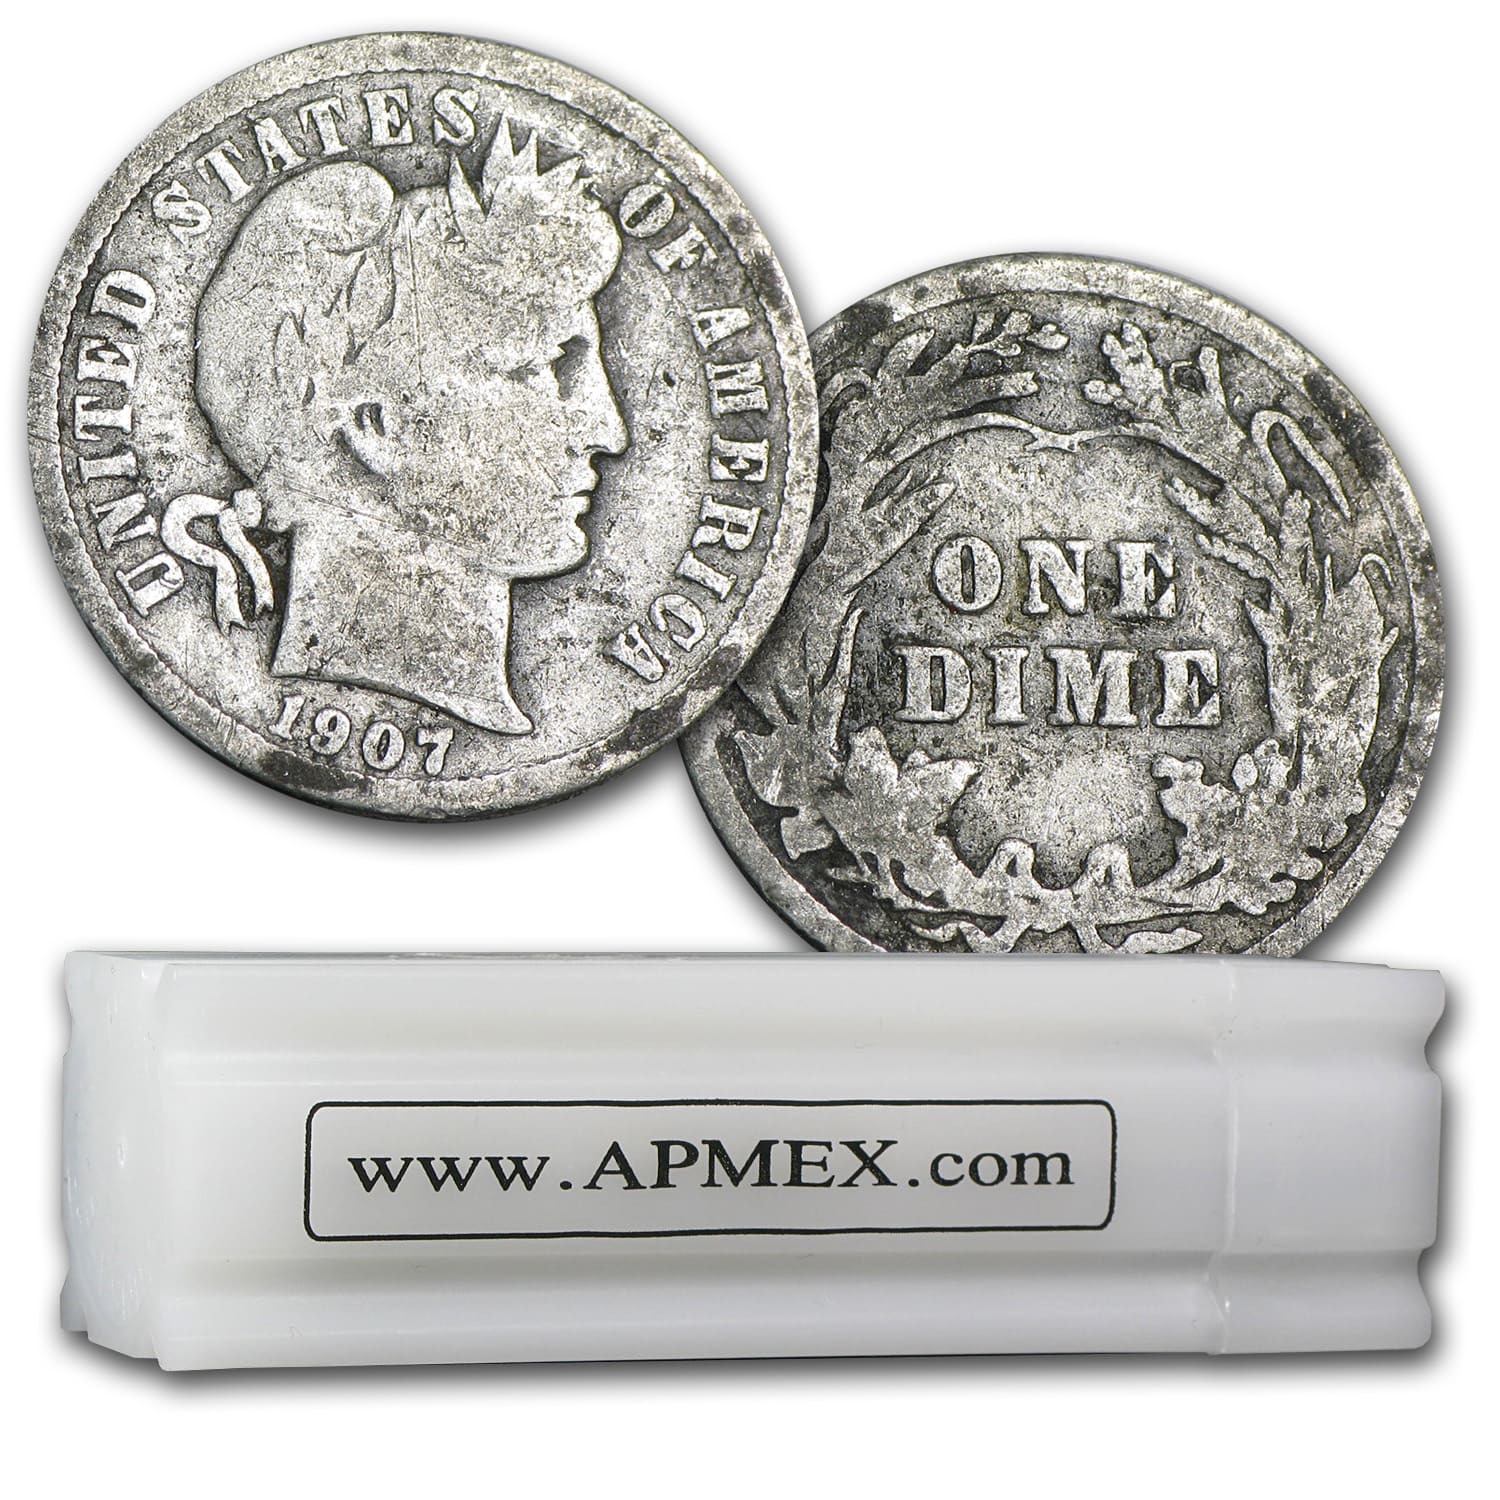 ampex coins and currency